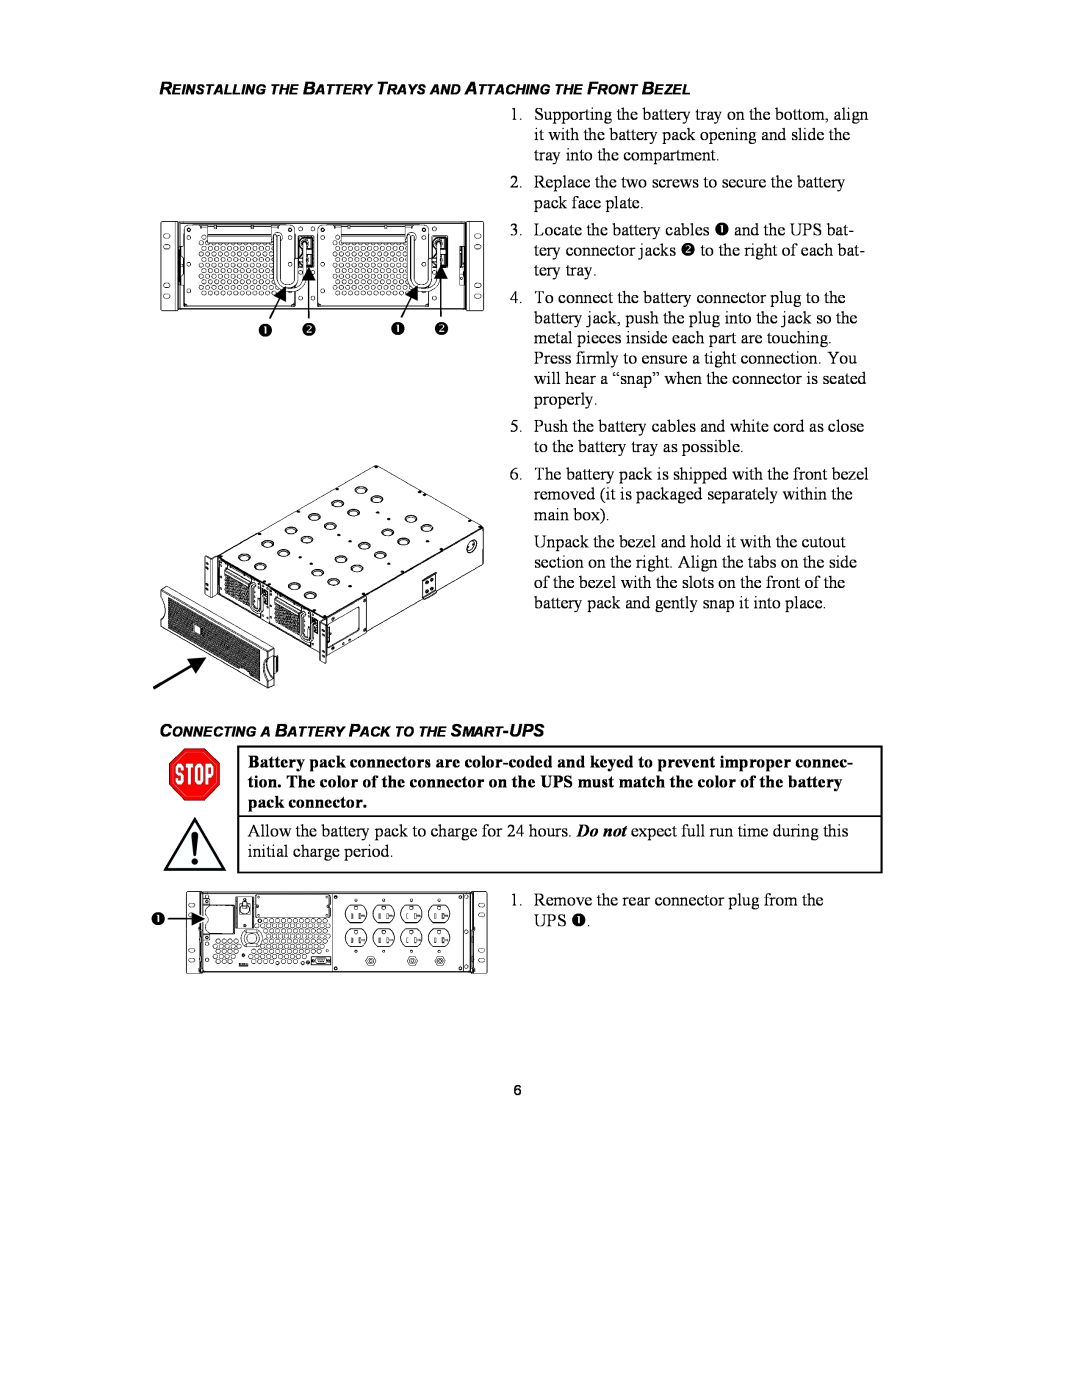 American Power Conversion 3U Rack Mount user manual it with the battery pack opening and slide the 